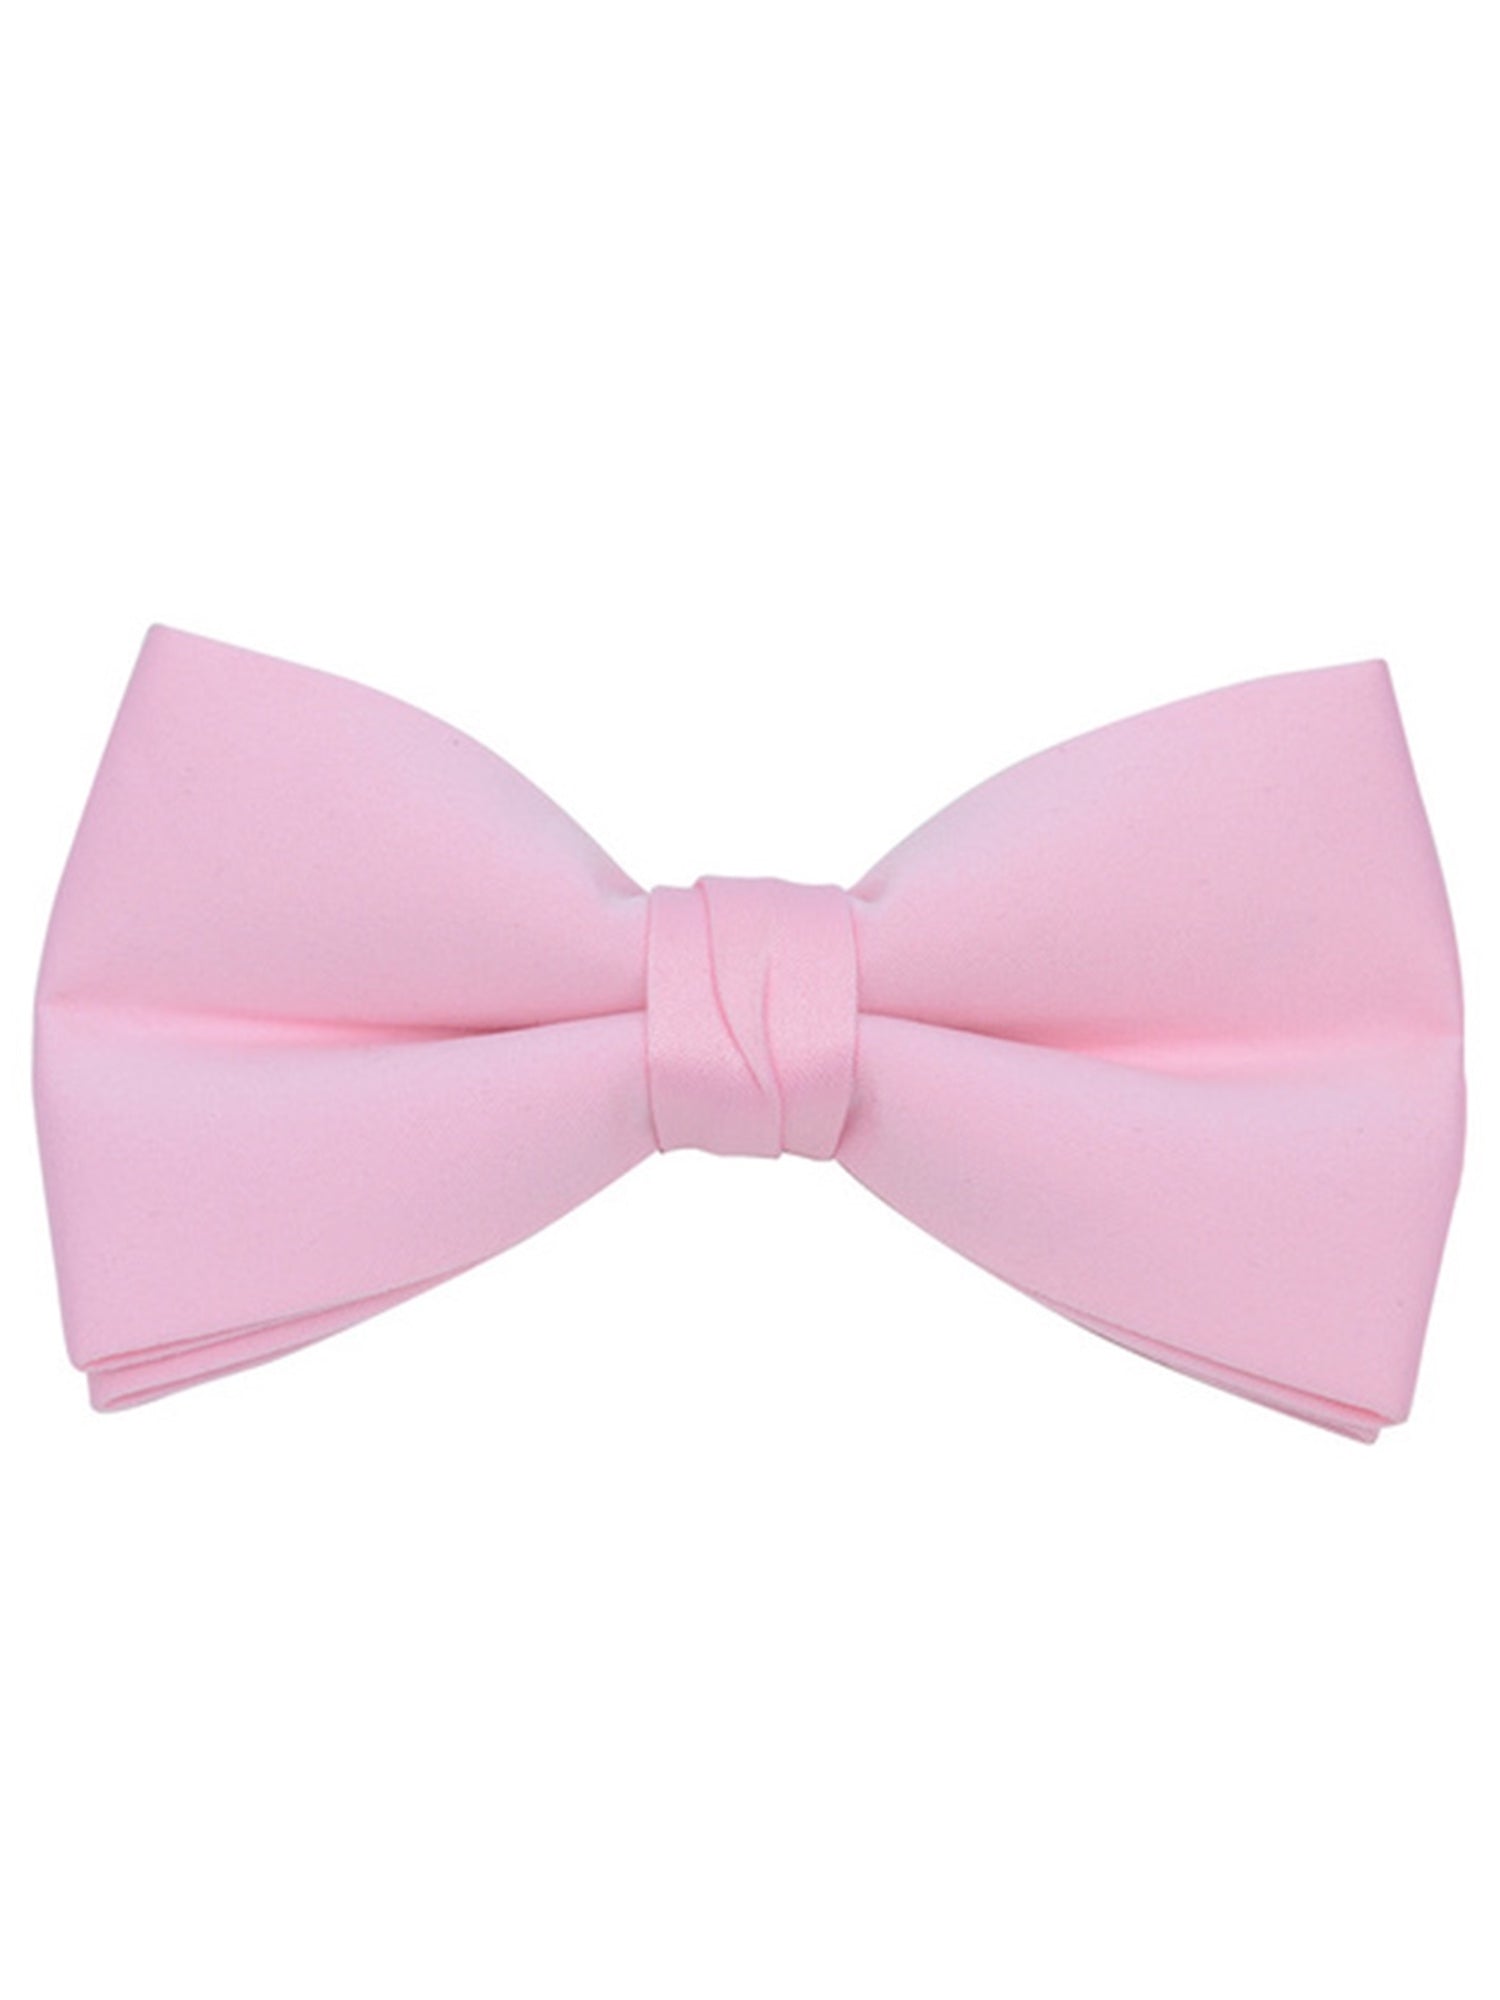 Men's Pre-tied Clip On Bow Tie - Formal Tuxedo Solid Color Men's Solid Color Bow Tie TheDapperTie Pink One Size 